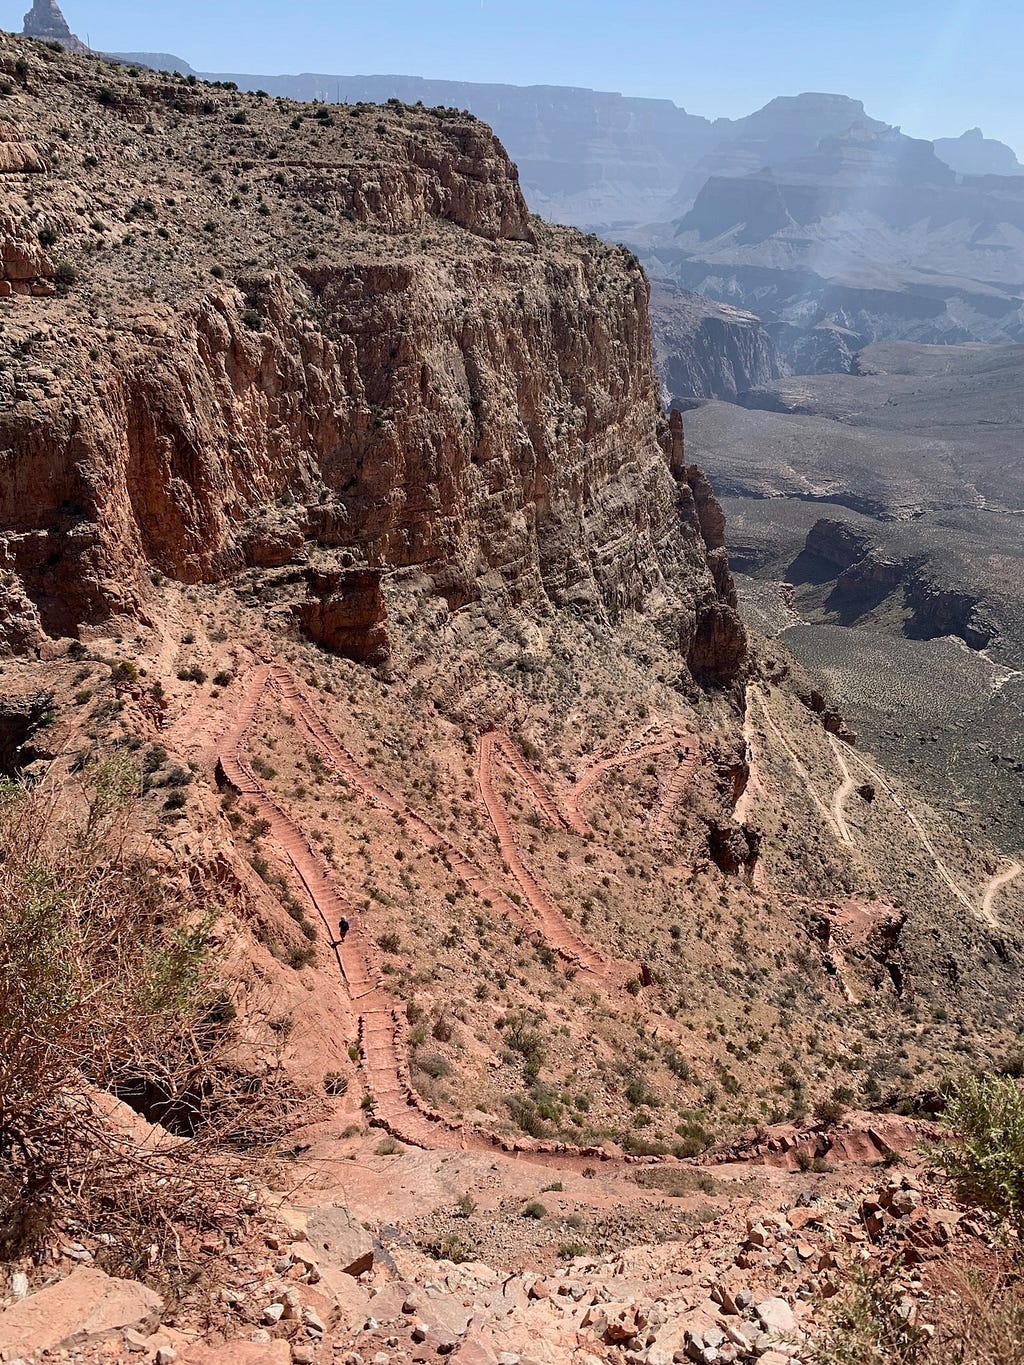 Switchbacks of a hiking path in the Grand Canyon